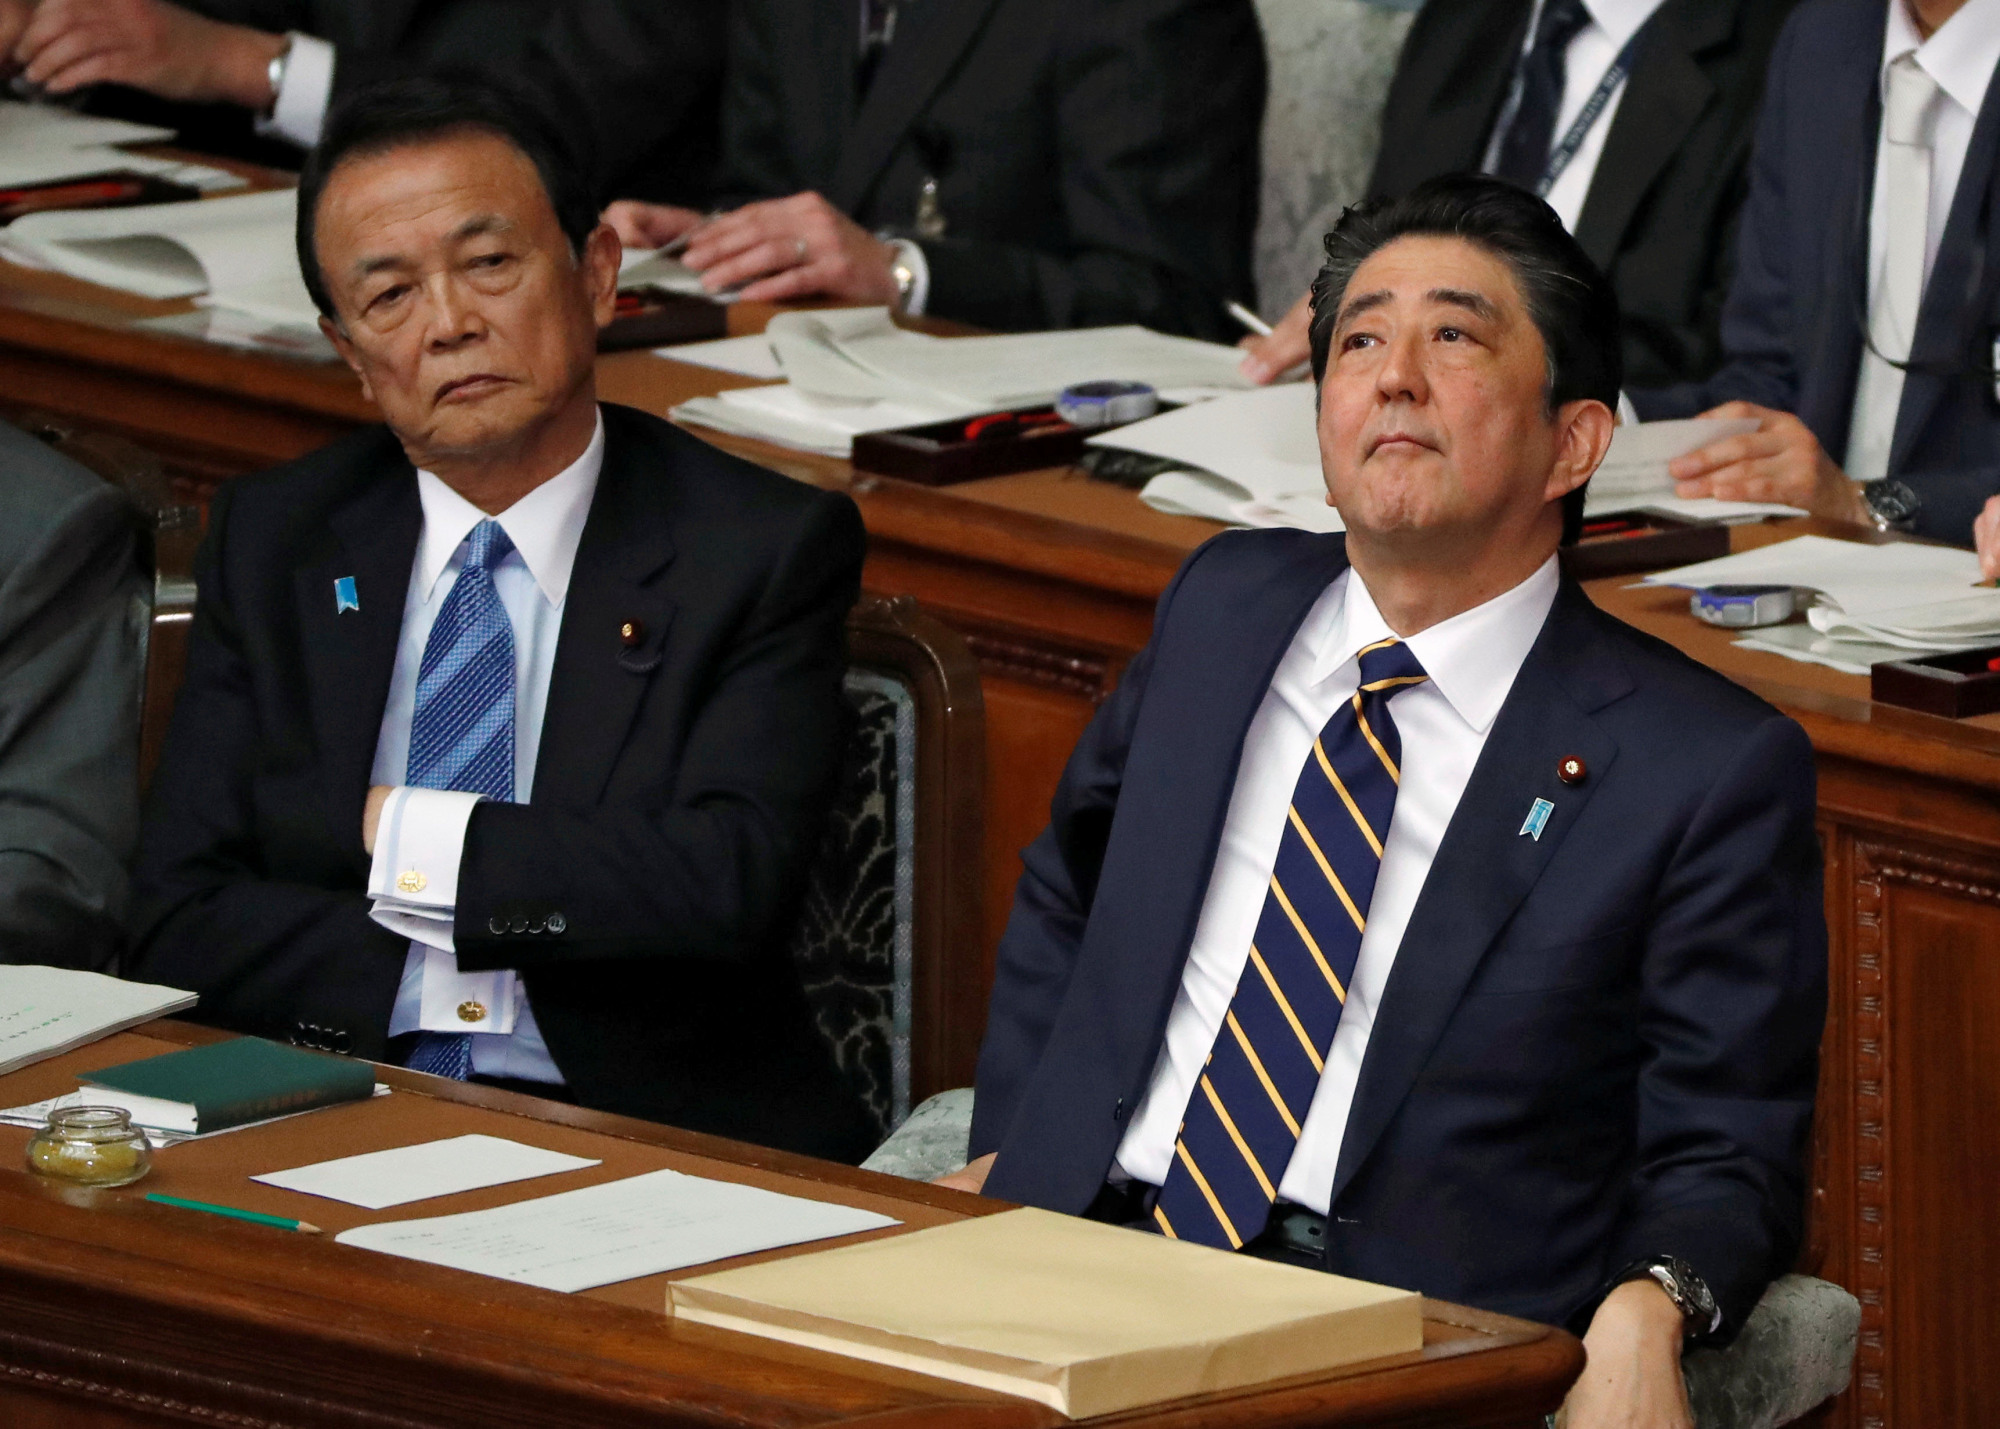 Prime Minister Shinzo Abe faces a number of key events this year, including the Upper House elections in July. | REUTERS